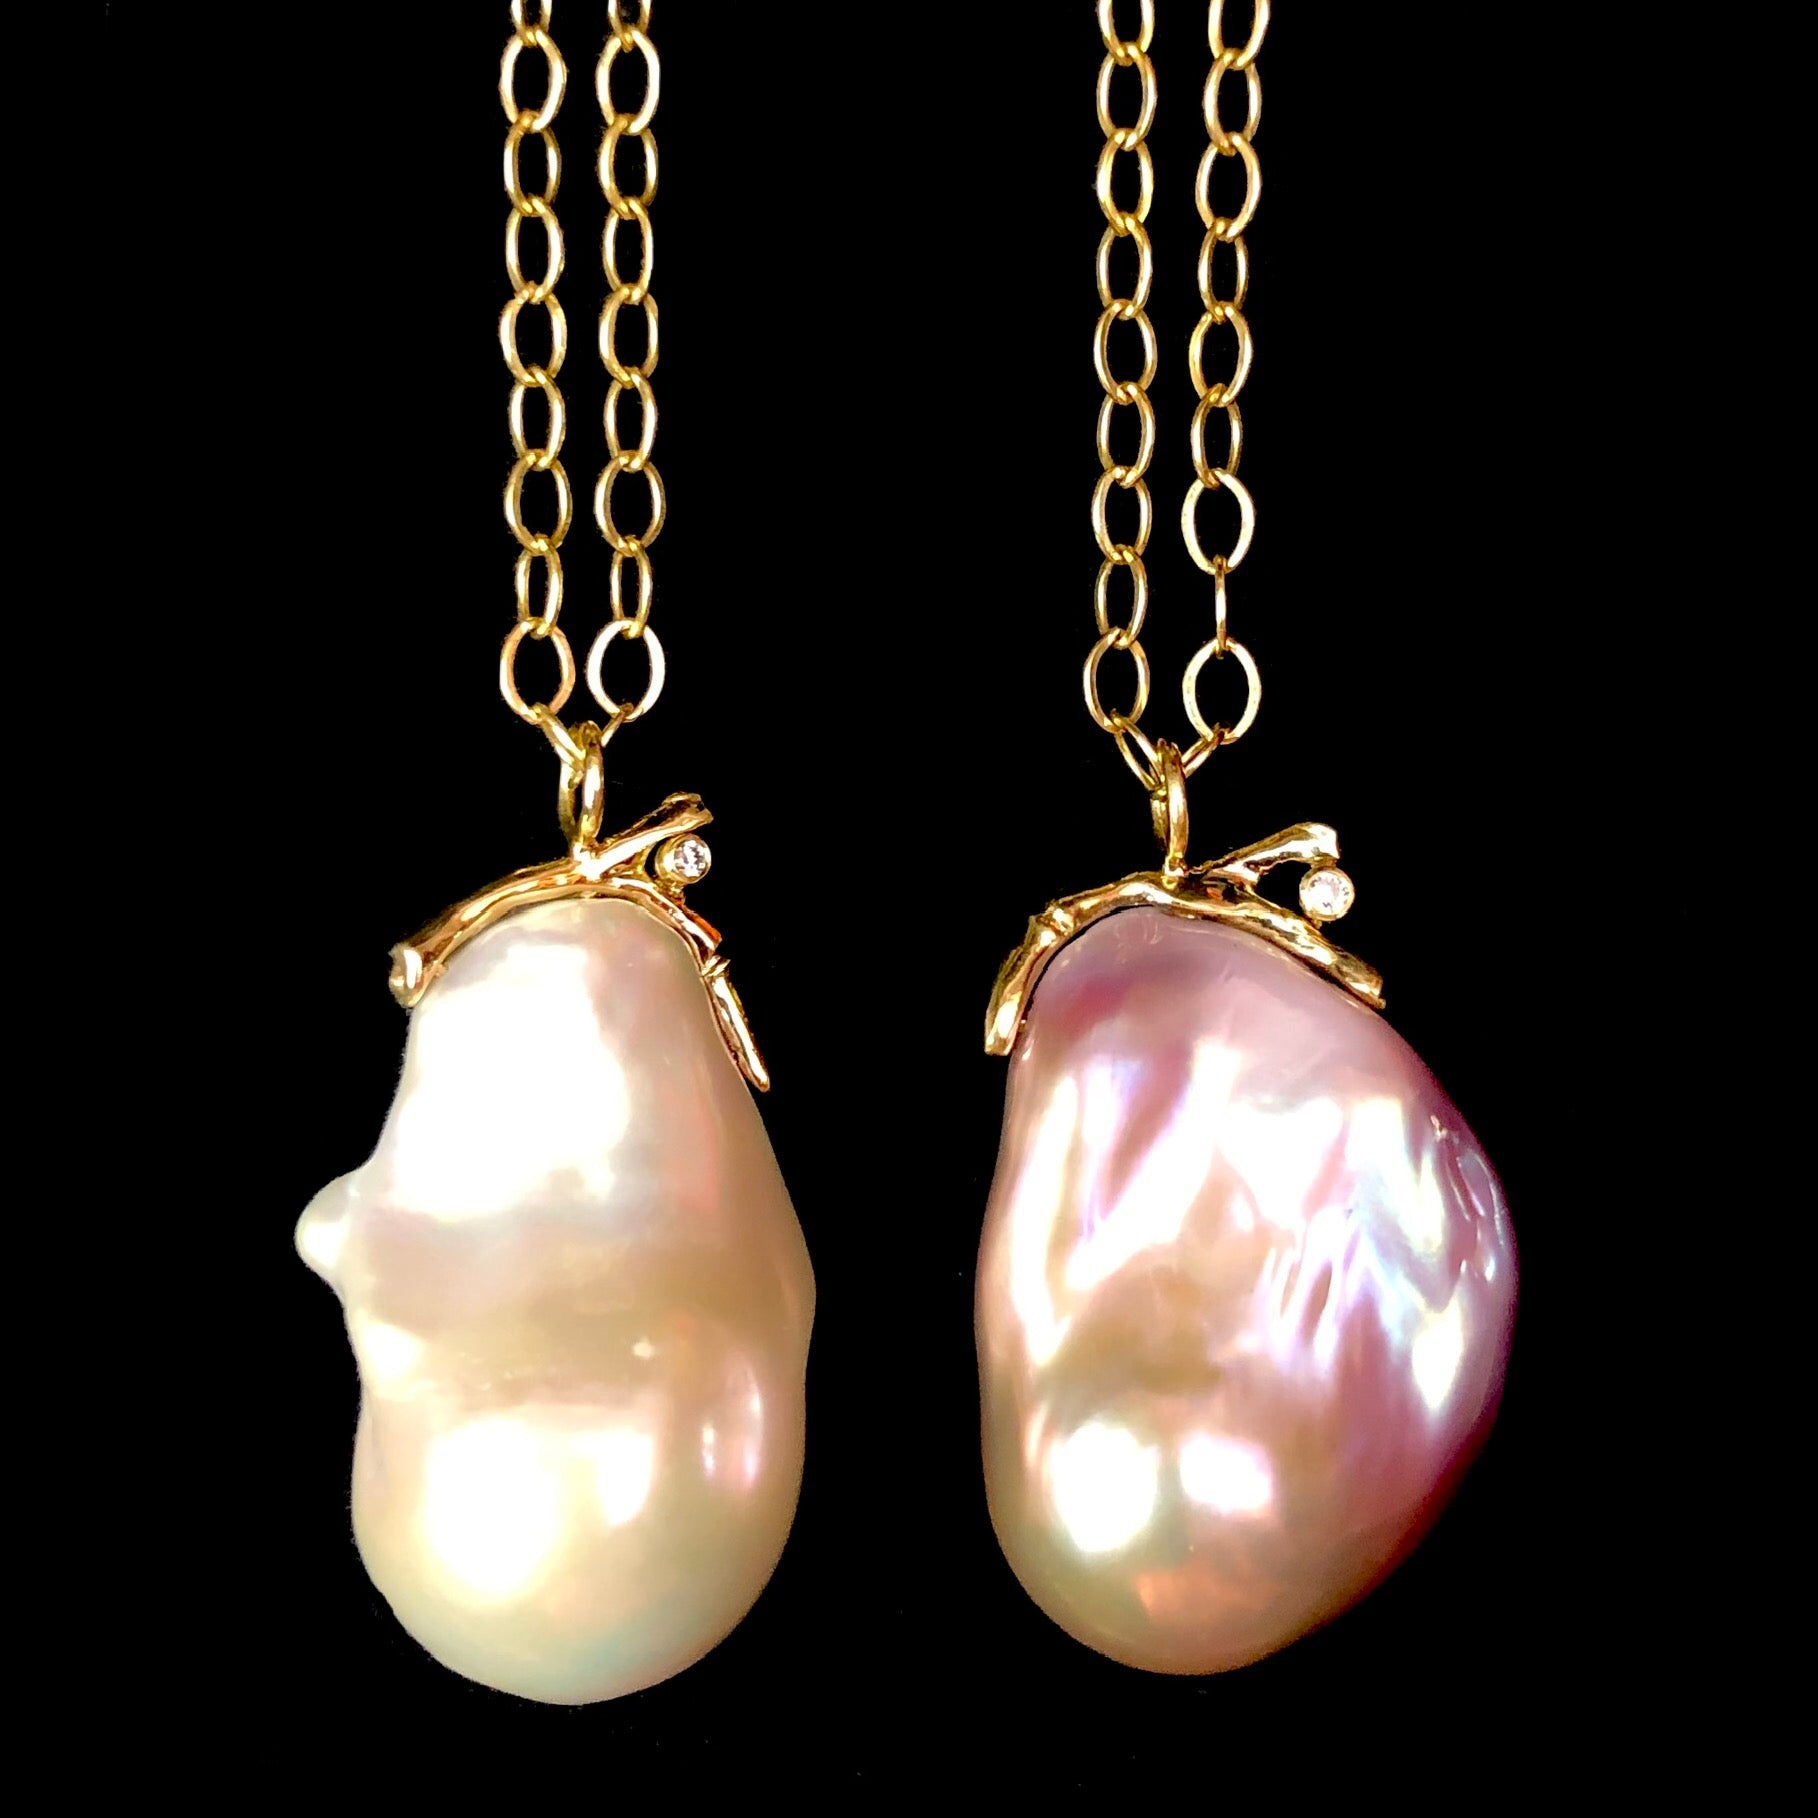 Pink Yangtze Pearl Necklace shown beside White Baroque Pearl Necklace by Jamie Joseph